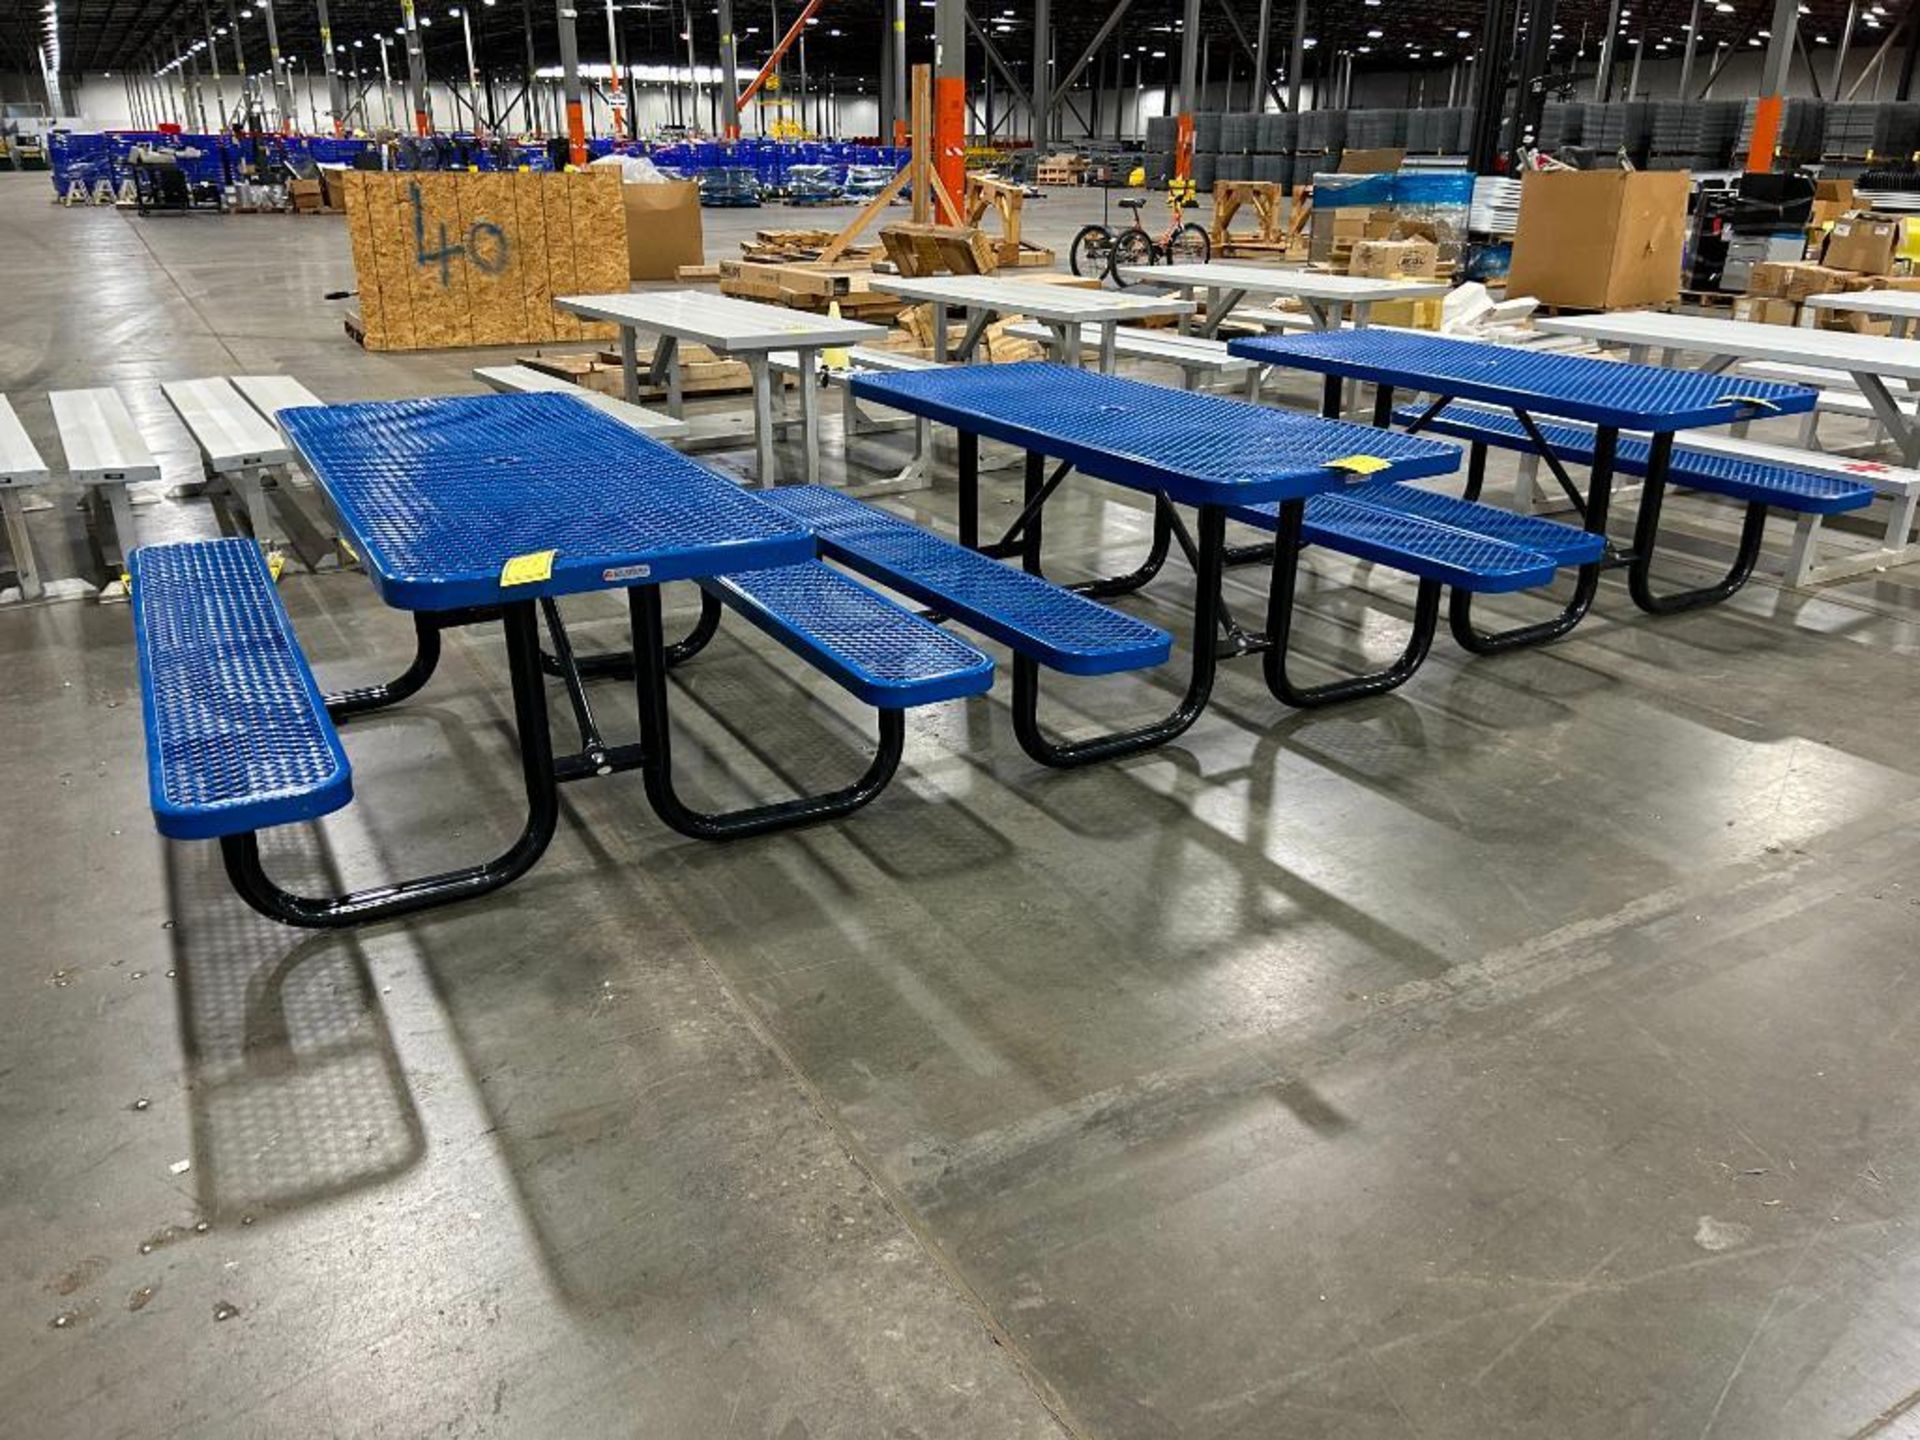 (3) Global Industrial Rubber Wrapped Steel Picnic Tables ($50 Loading Fee Will Be Added To Invoice)